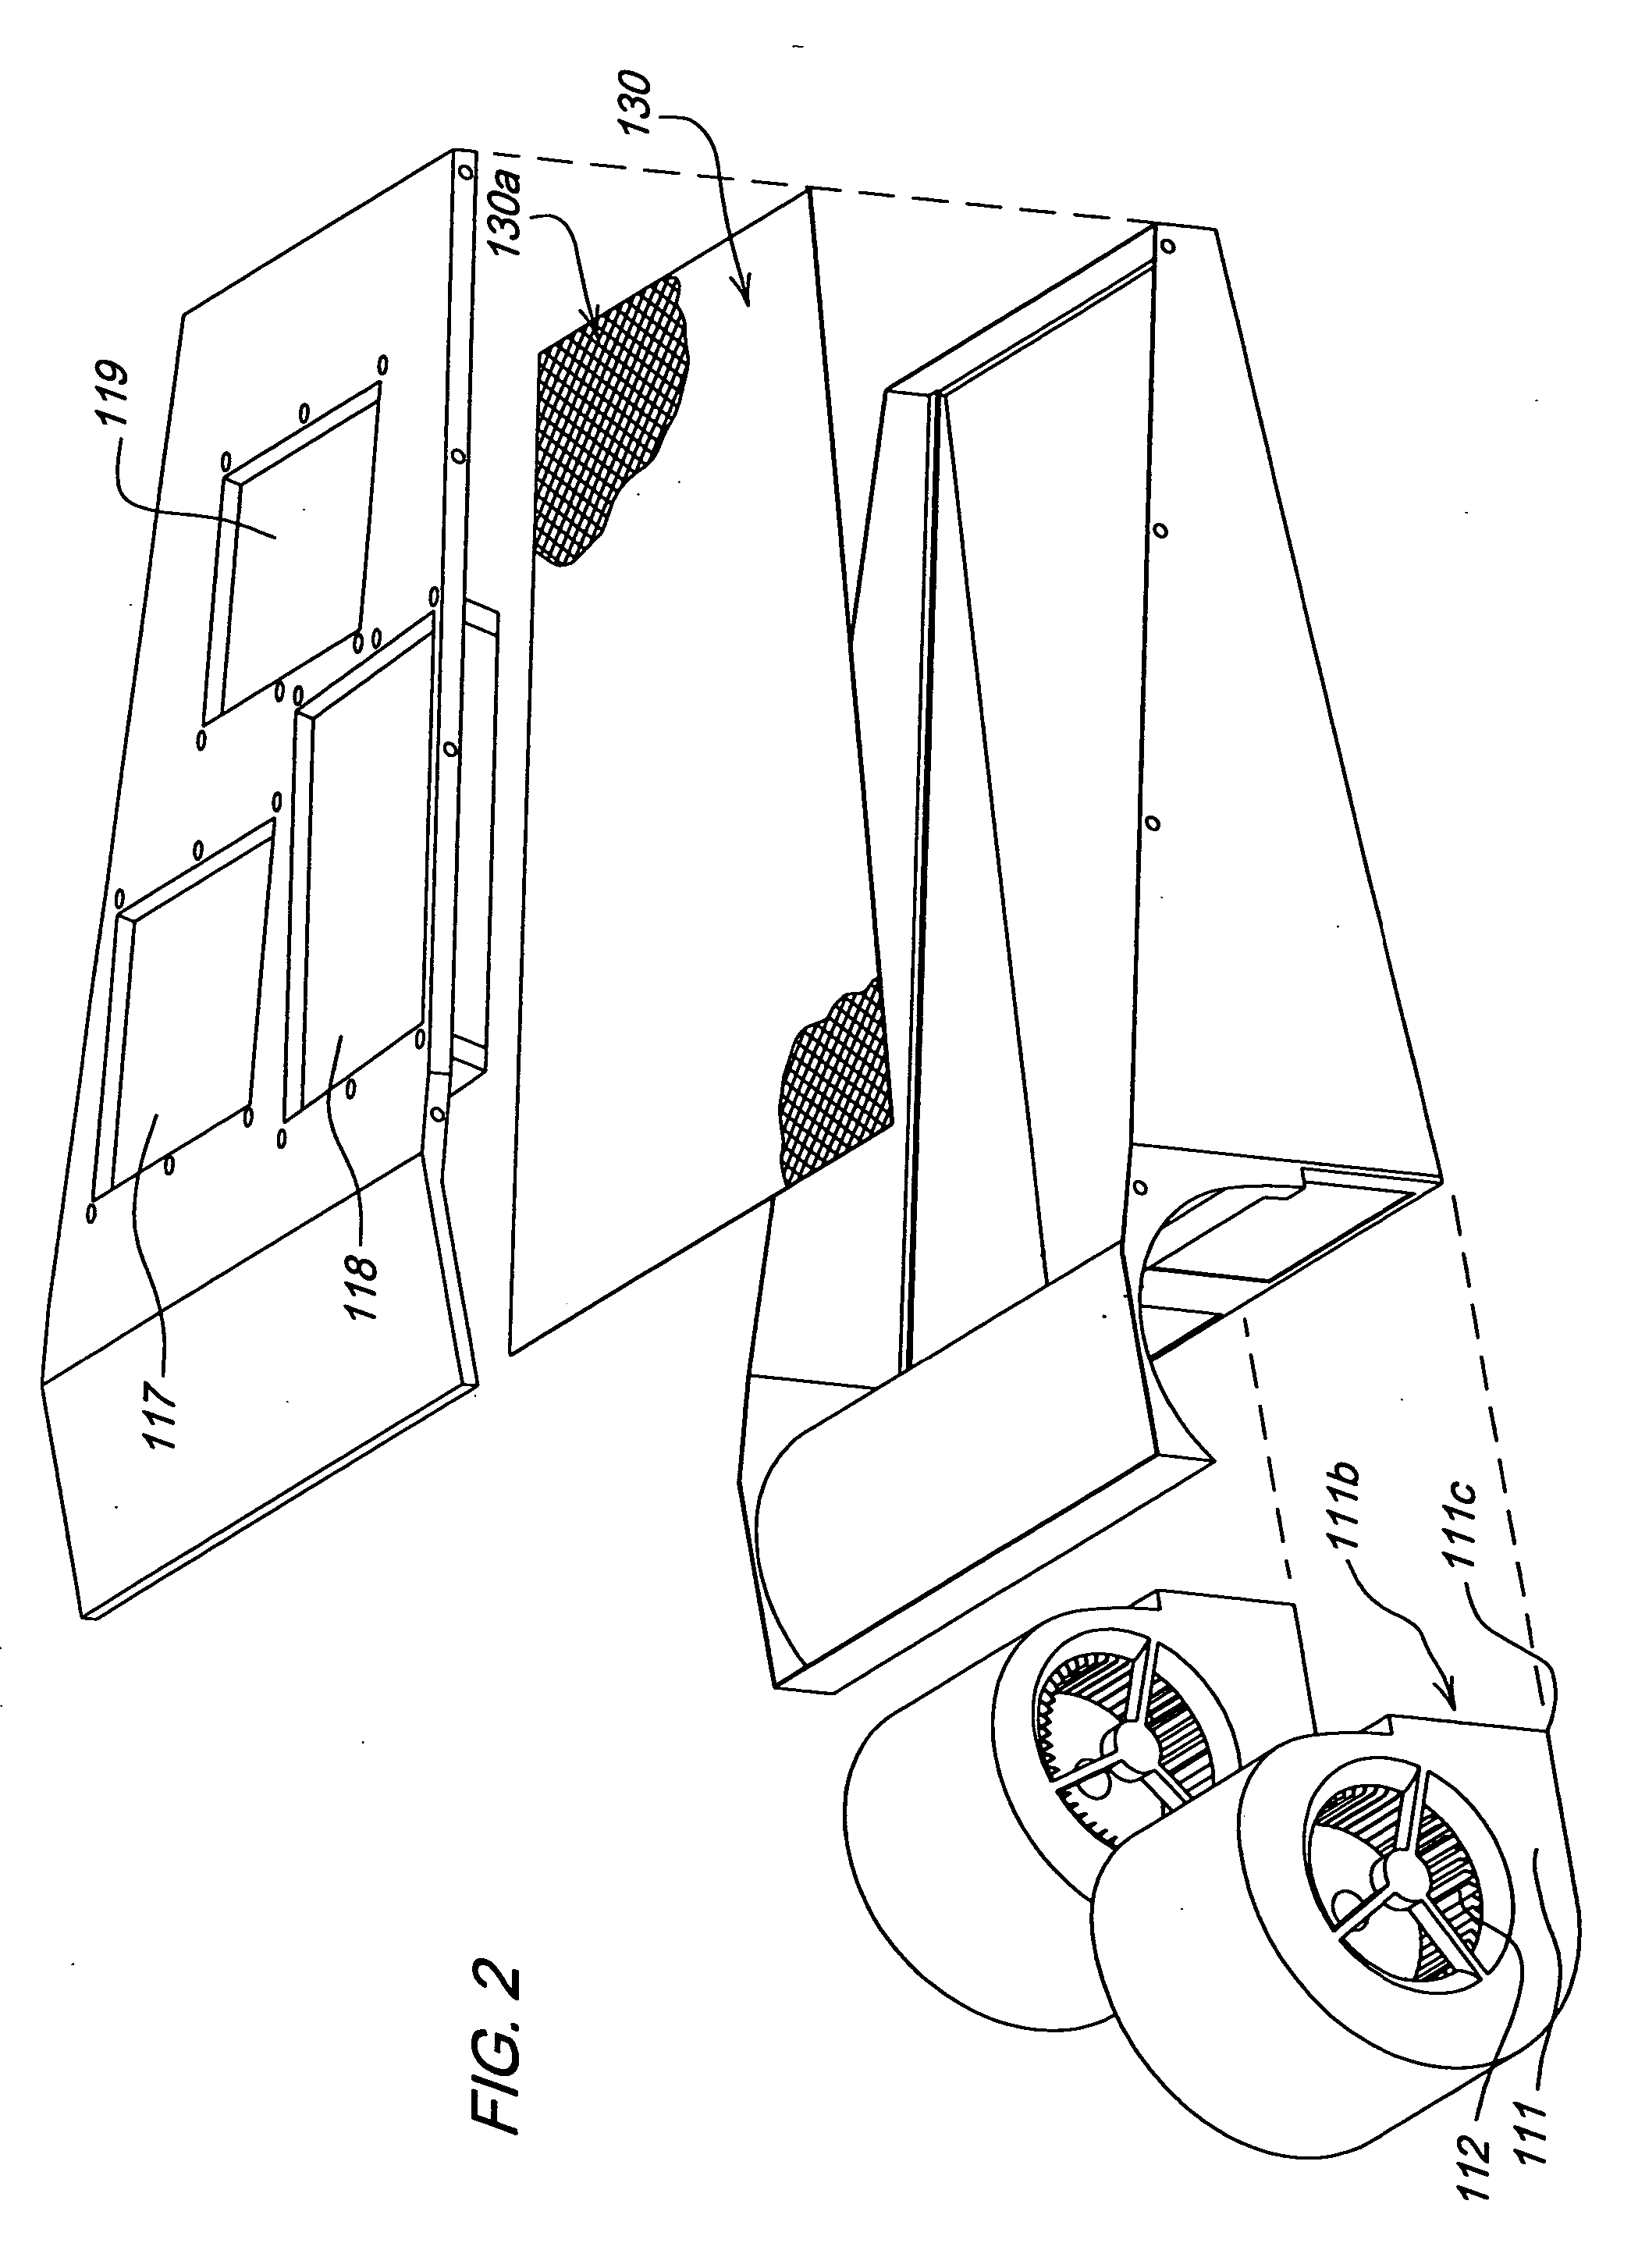 Cooling system with active debris separation